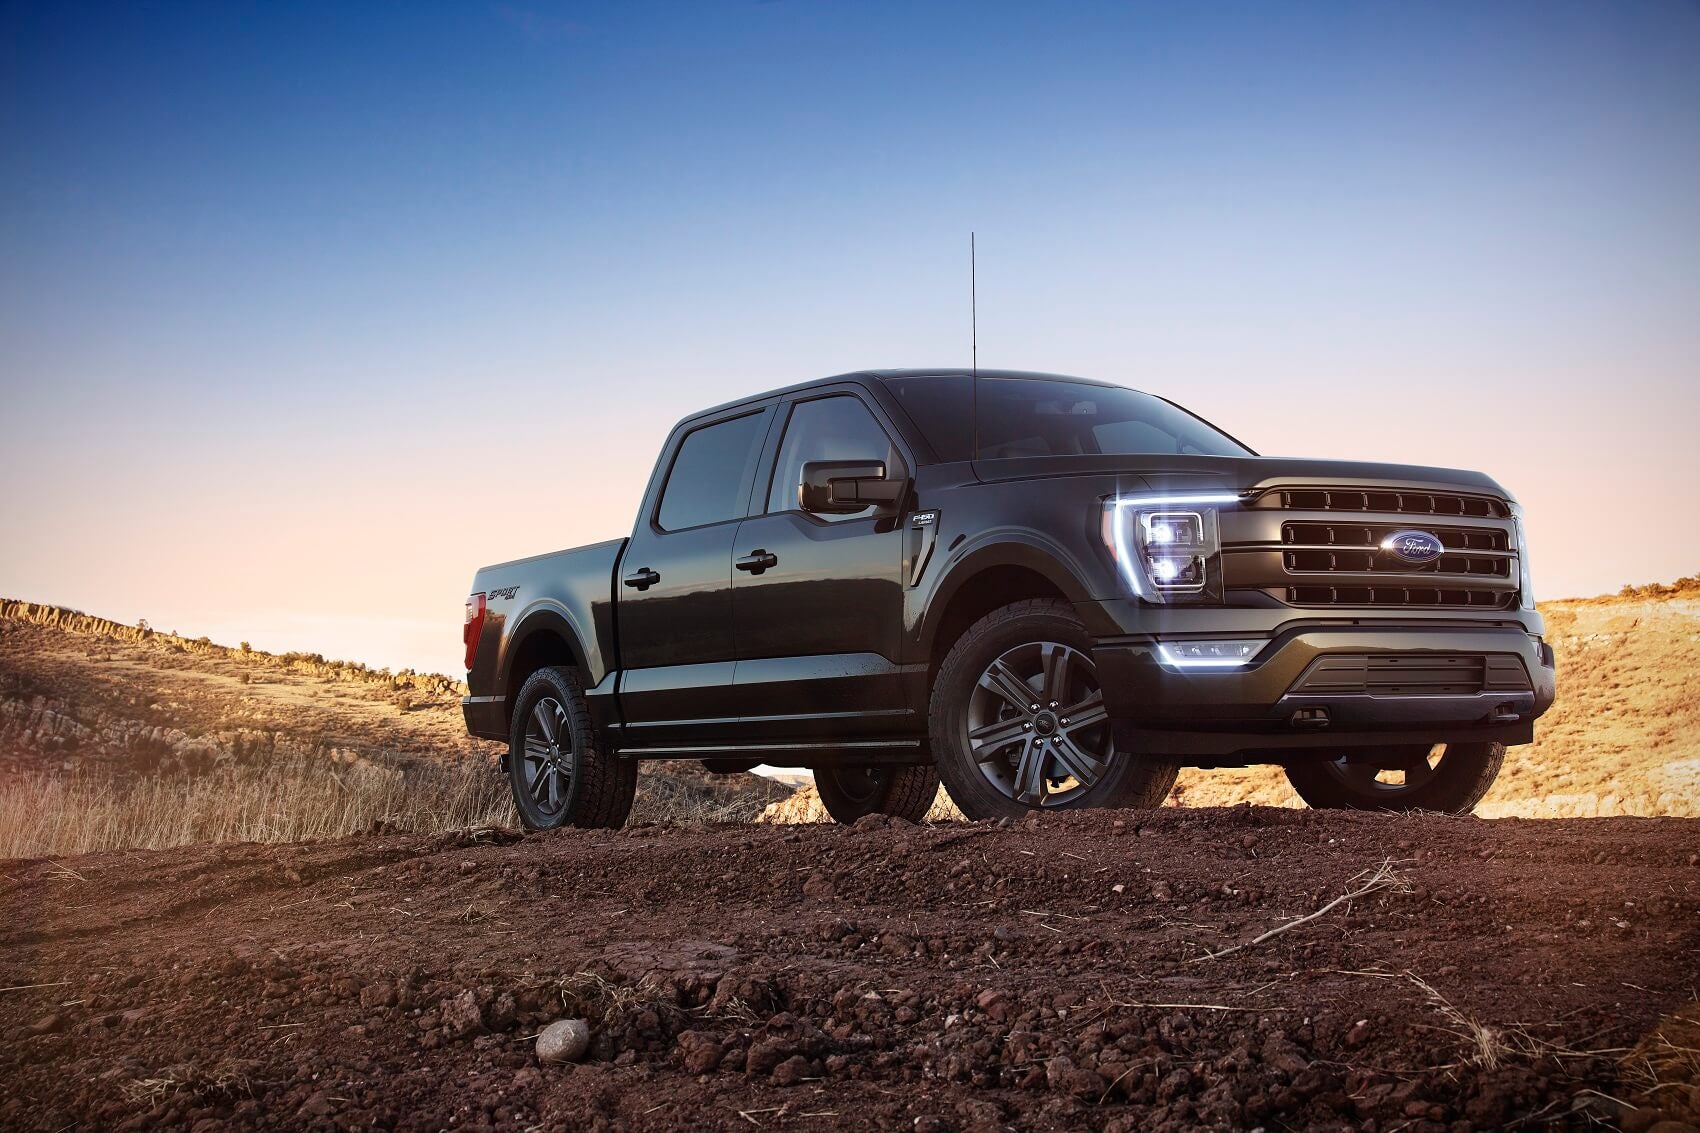 Find Out What Makes the Ford F-150 So Impressive